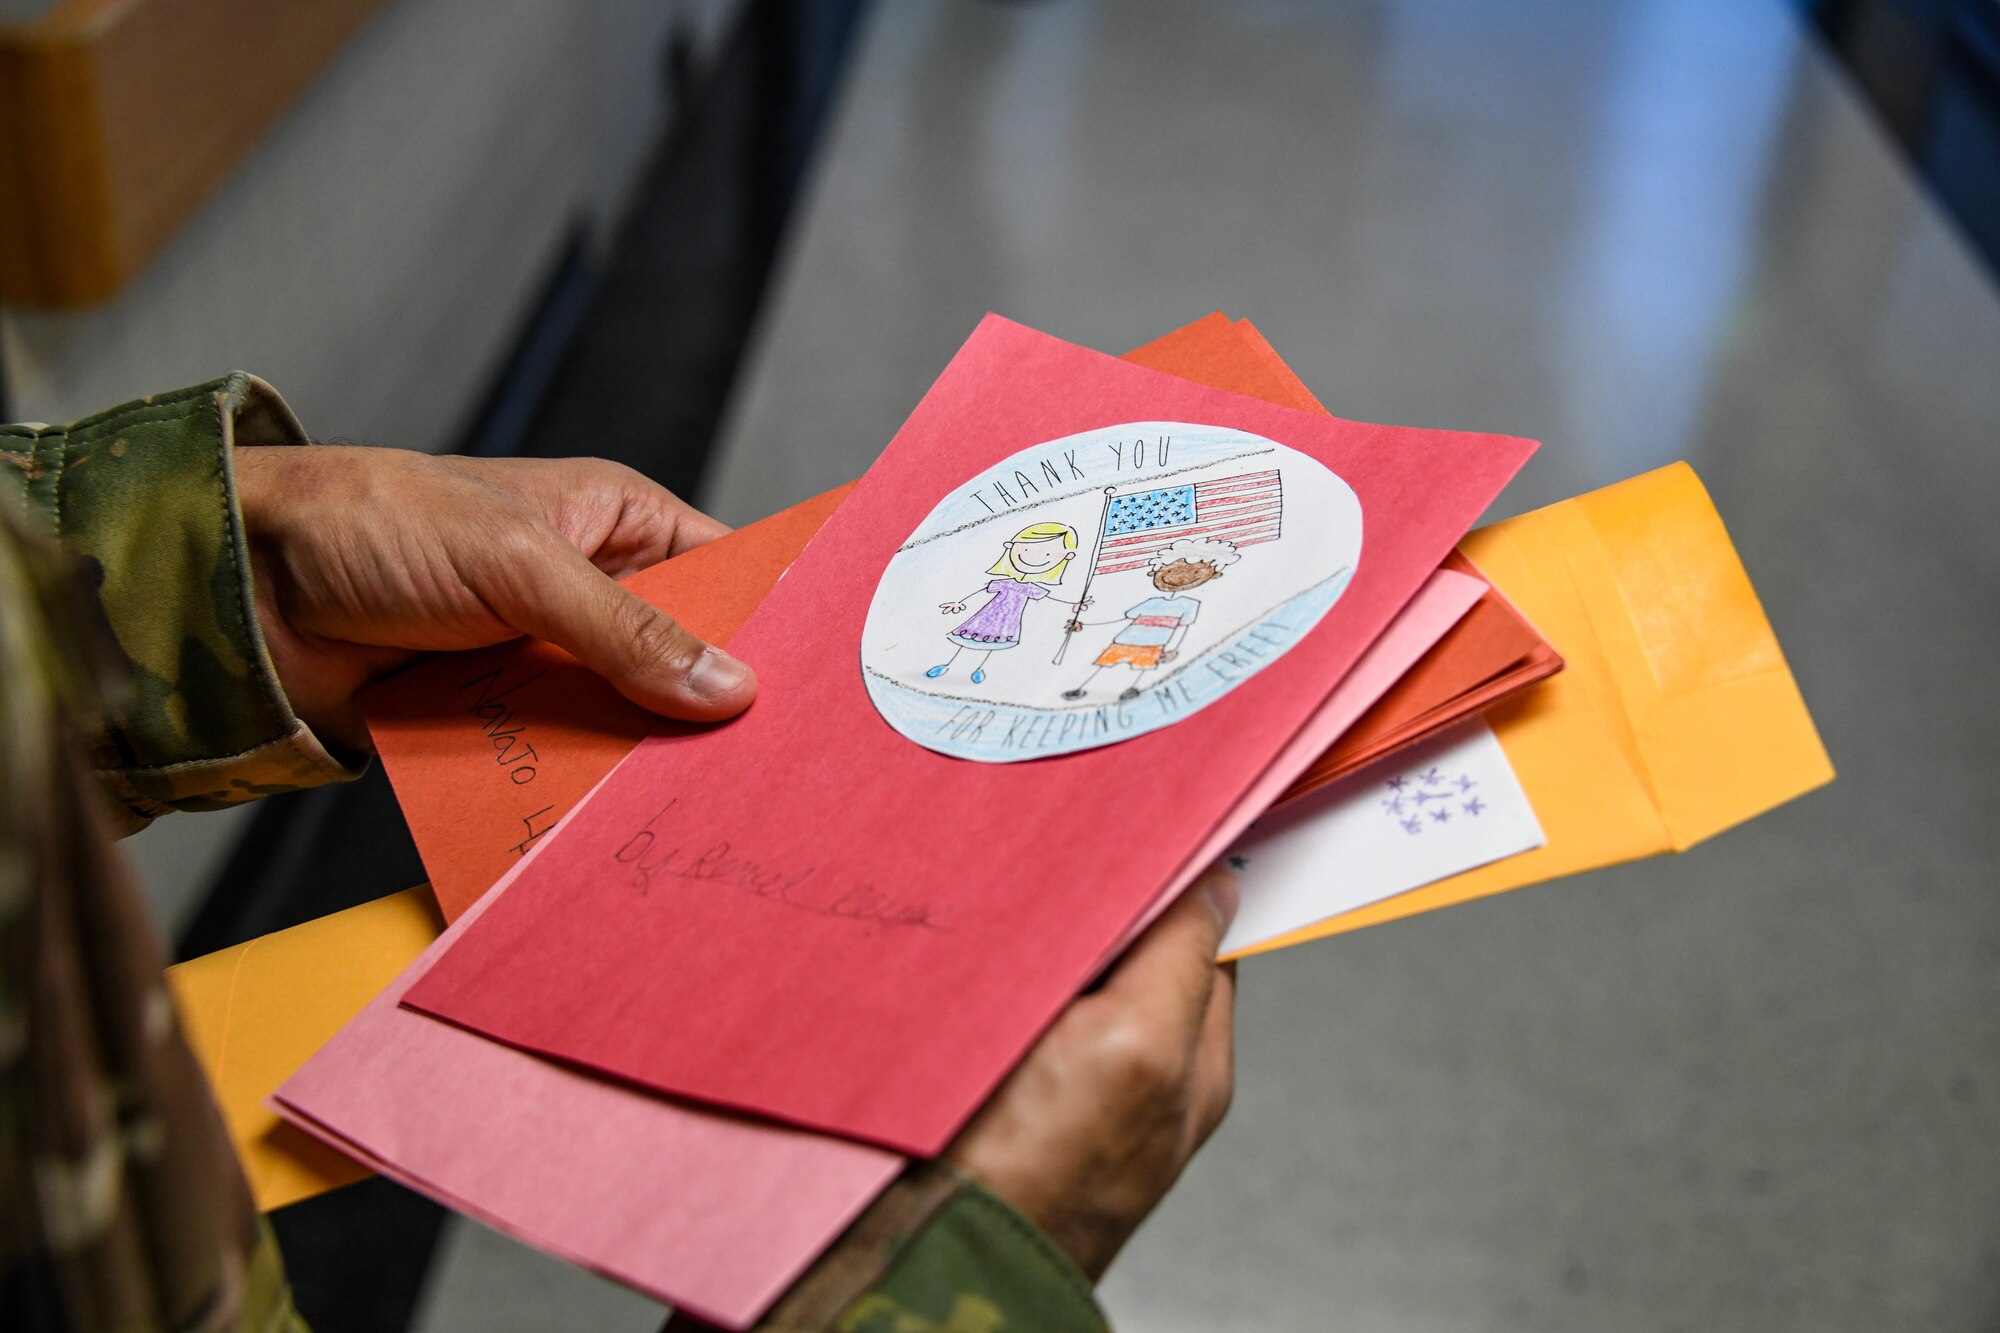 U.S. Air Force Airman 1st Class Gabriel Cruz-Lubina, 97th Communications Squadron systems technician, holds Valentine’s Day cards at the Clinton Veterans Center, Oklahoma, Feb. 14, 2022. More than 200 Valentine’s Day cards were made by students for local veterans. (U.S. Air Force photo by Senior Airman Kayla Christenson)